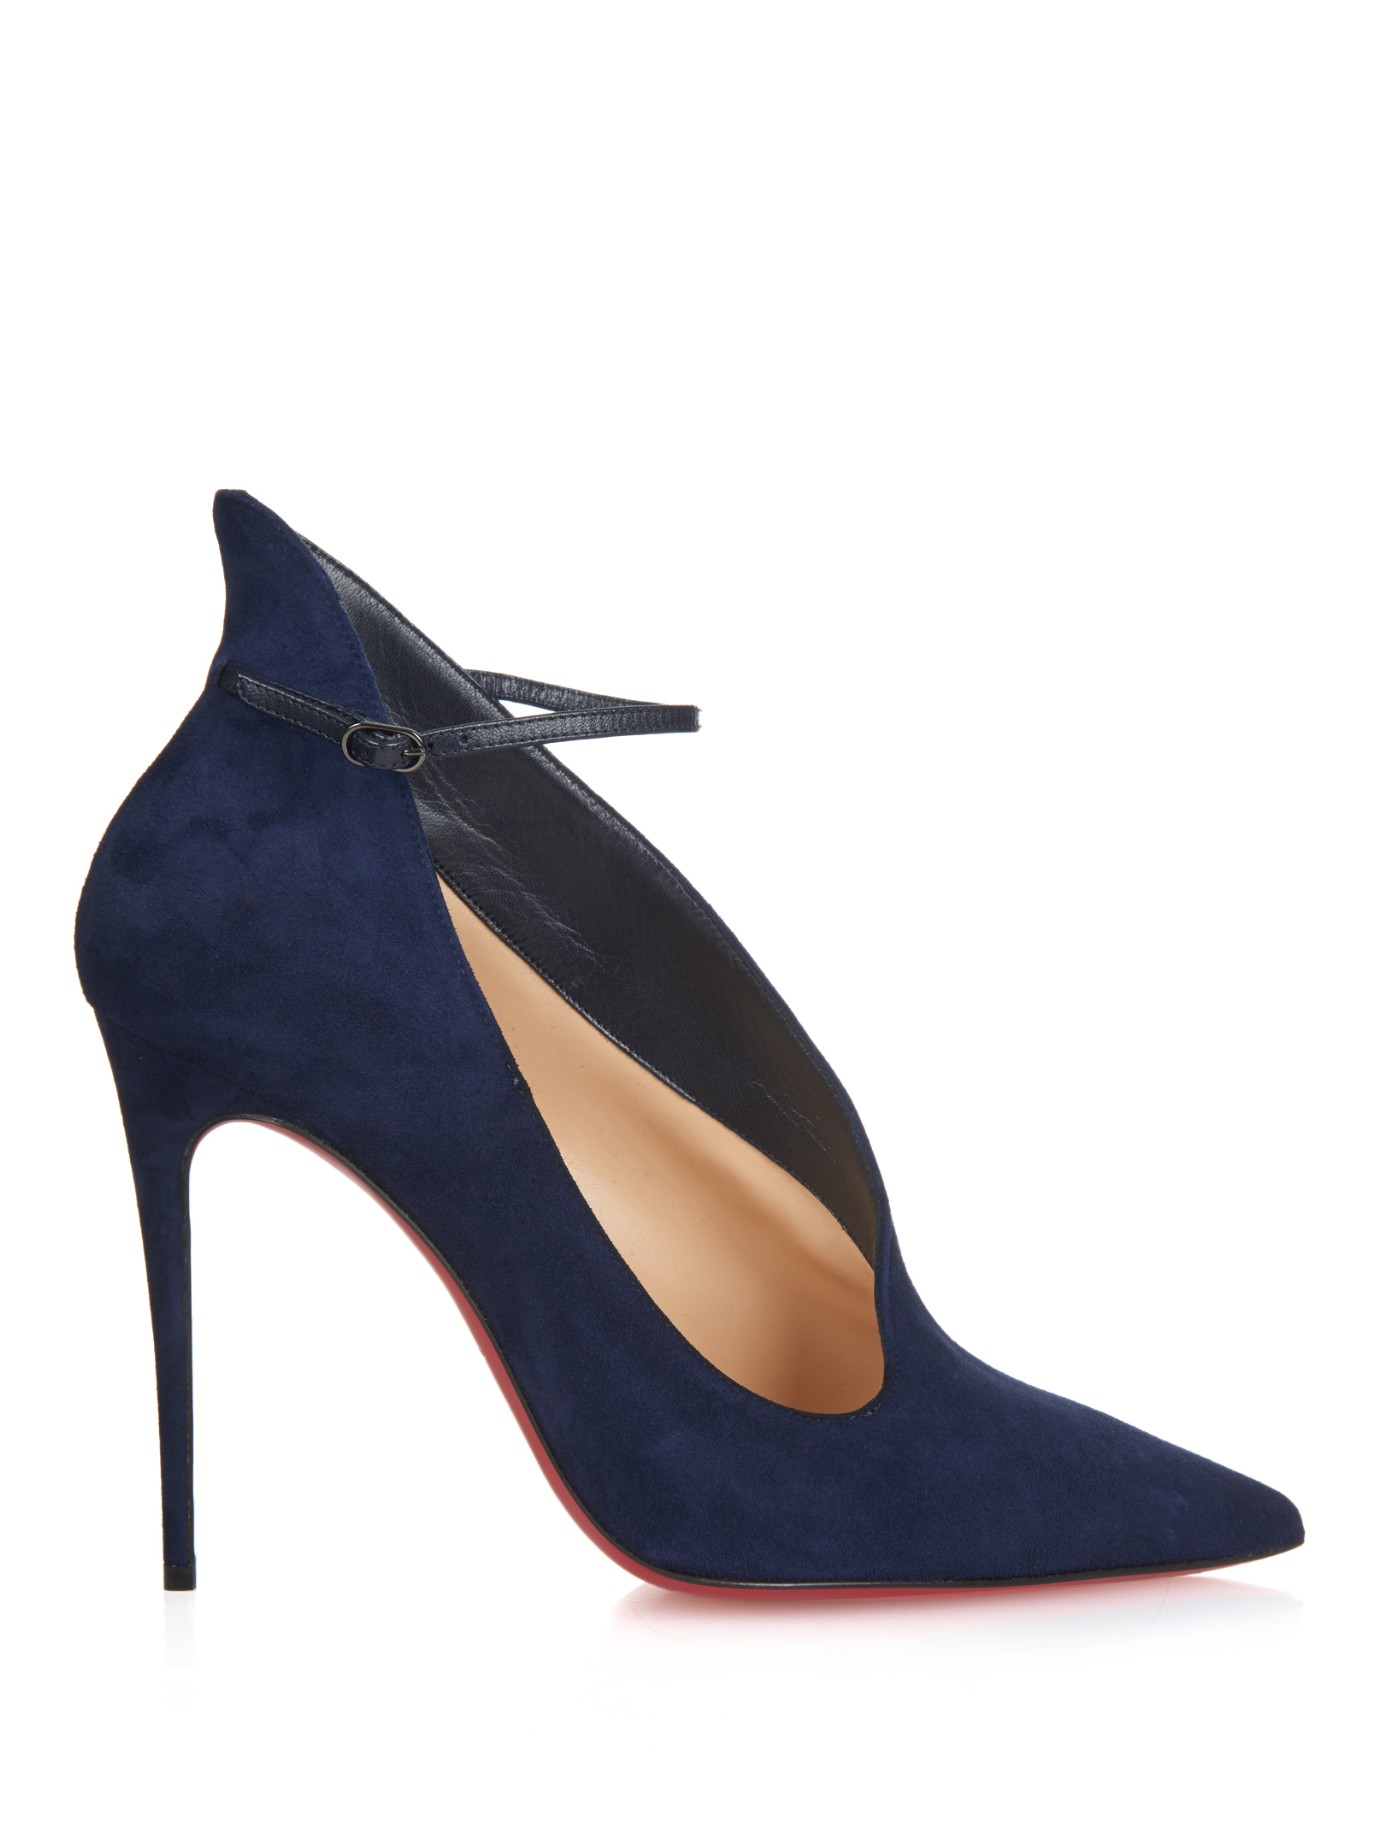 christian louboutin rolling spikes - Christian louboutin Vampydoly Suede Pumps in Blue (NAVY) | Lyst